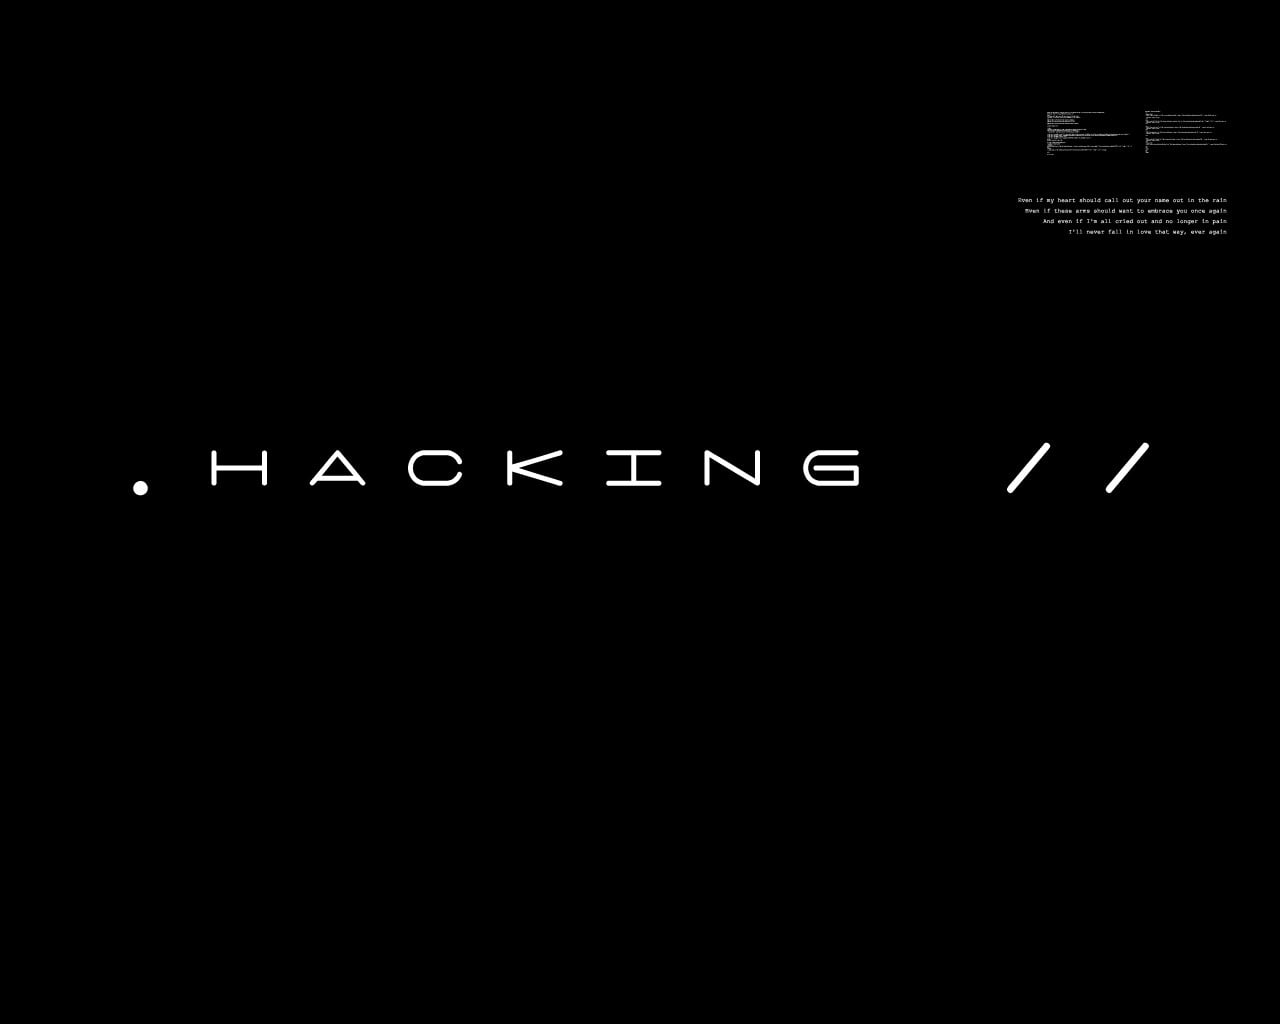 white text on black background, hacking, western script, copy space